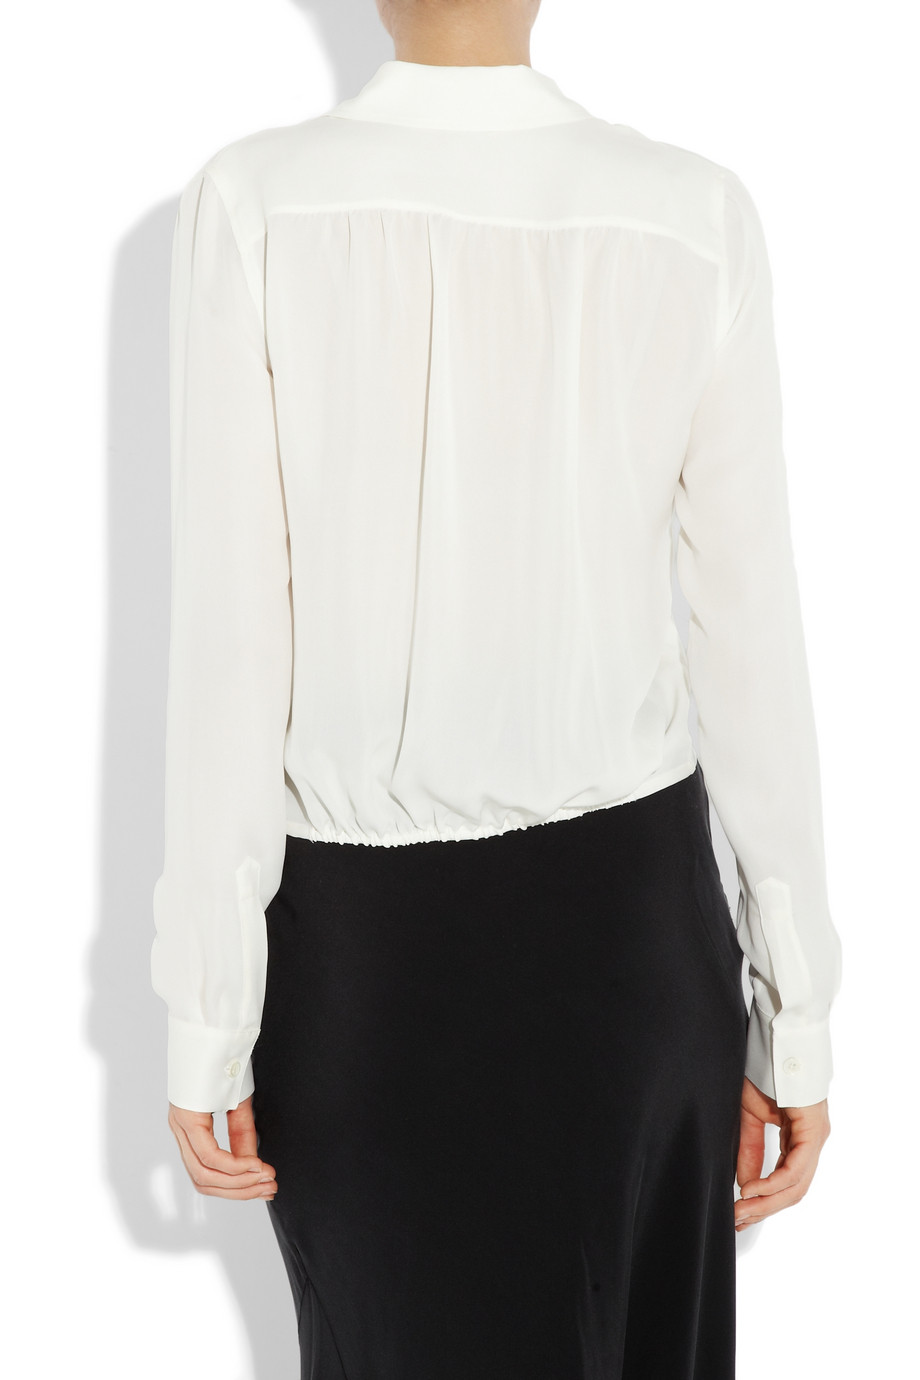 Lyst - Theory Orencia Tie-front Silk Blouse in Natural